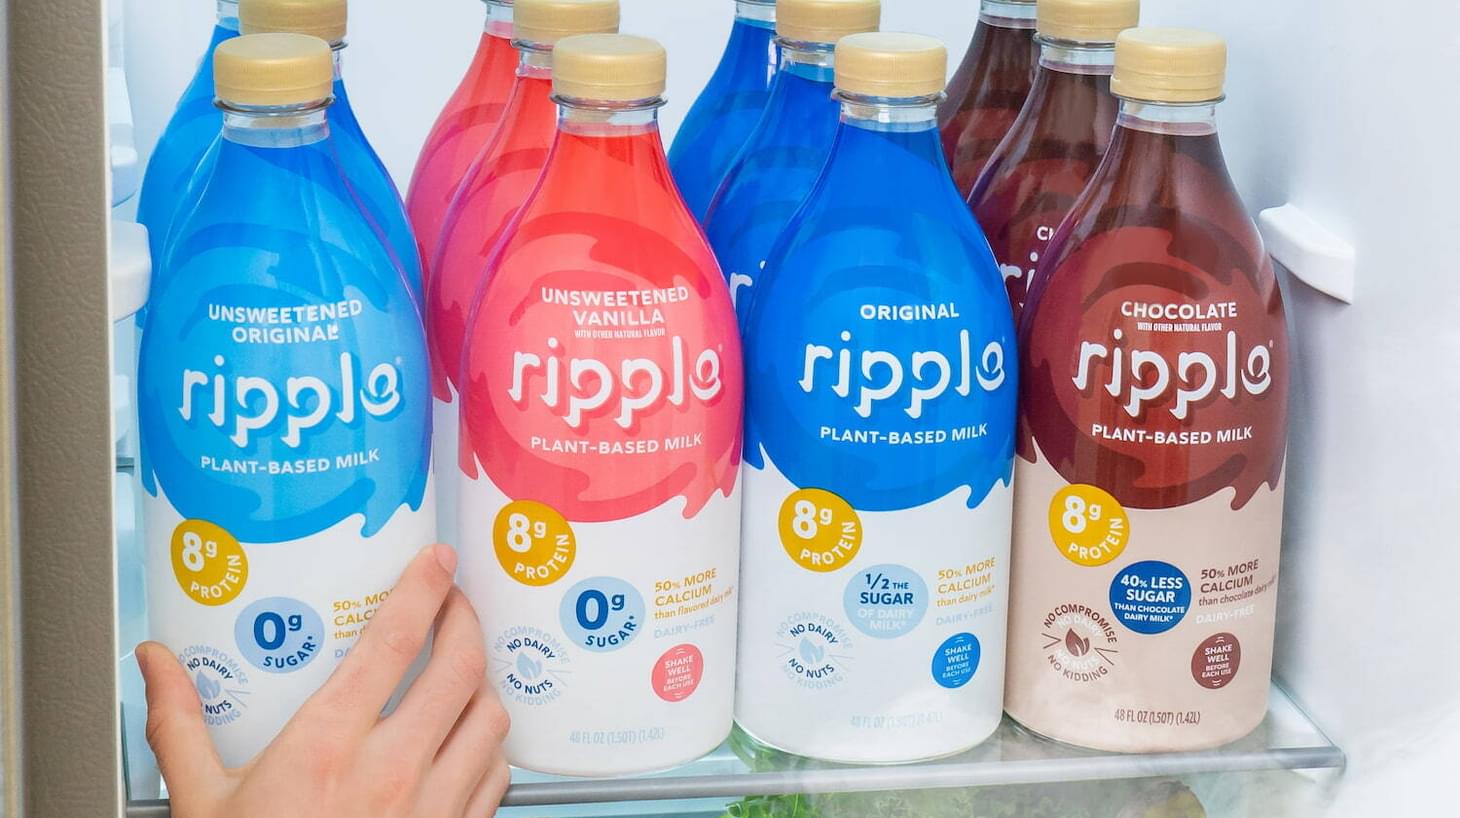 Different types of Ripple plant-based milk lined up on the shelf of a fridge